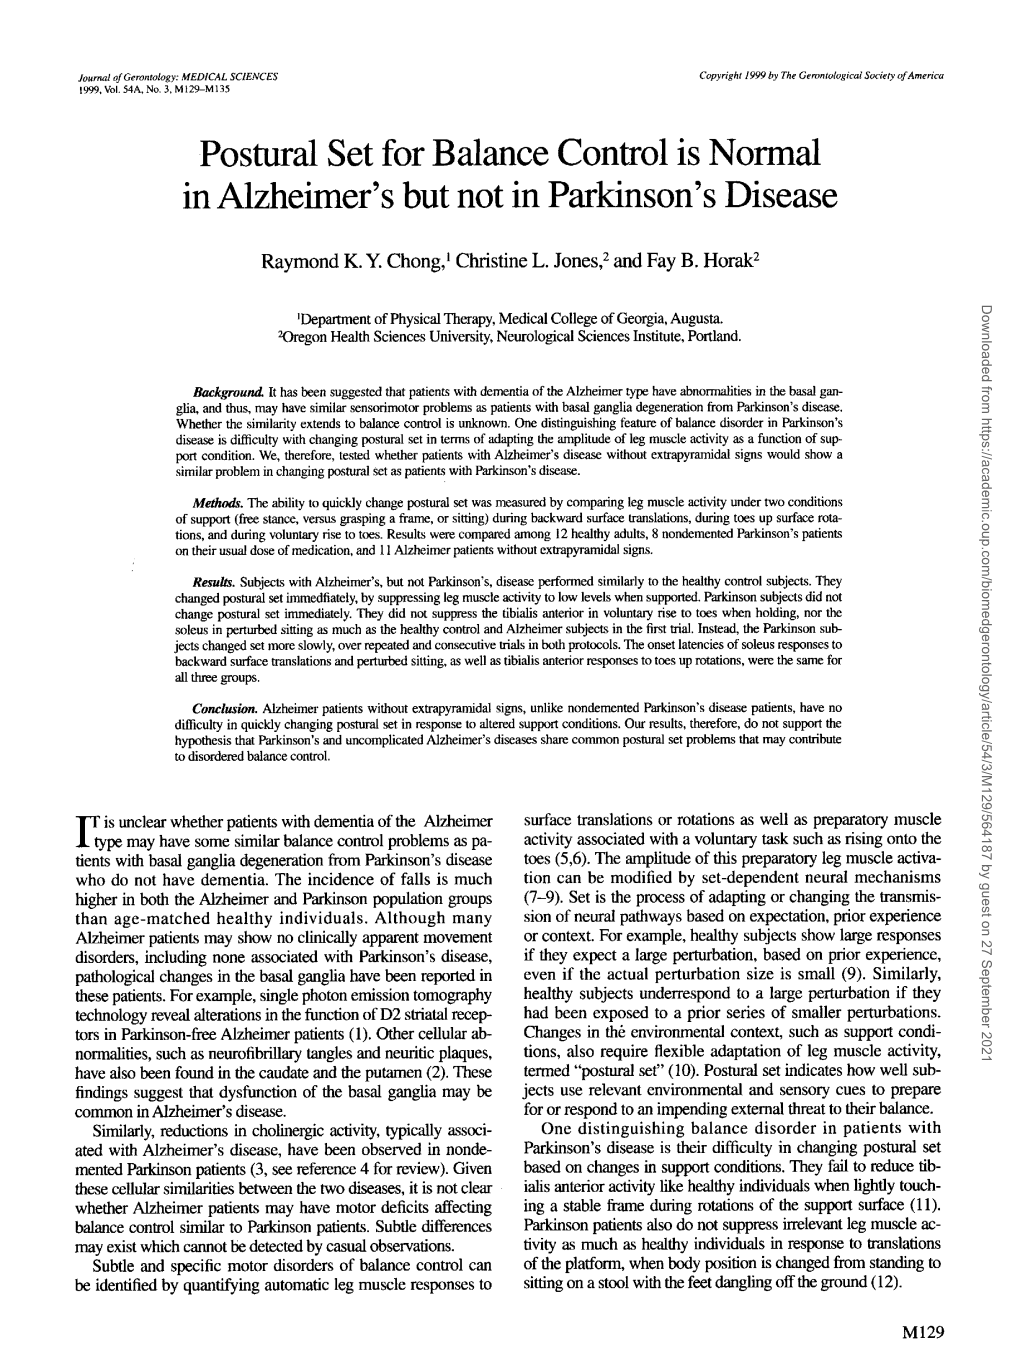 Postural Set for Balance Control Is Normal Inalzheimer's but Not in Parkinson's Disease